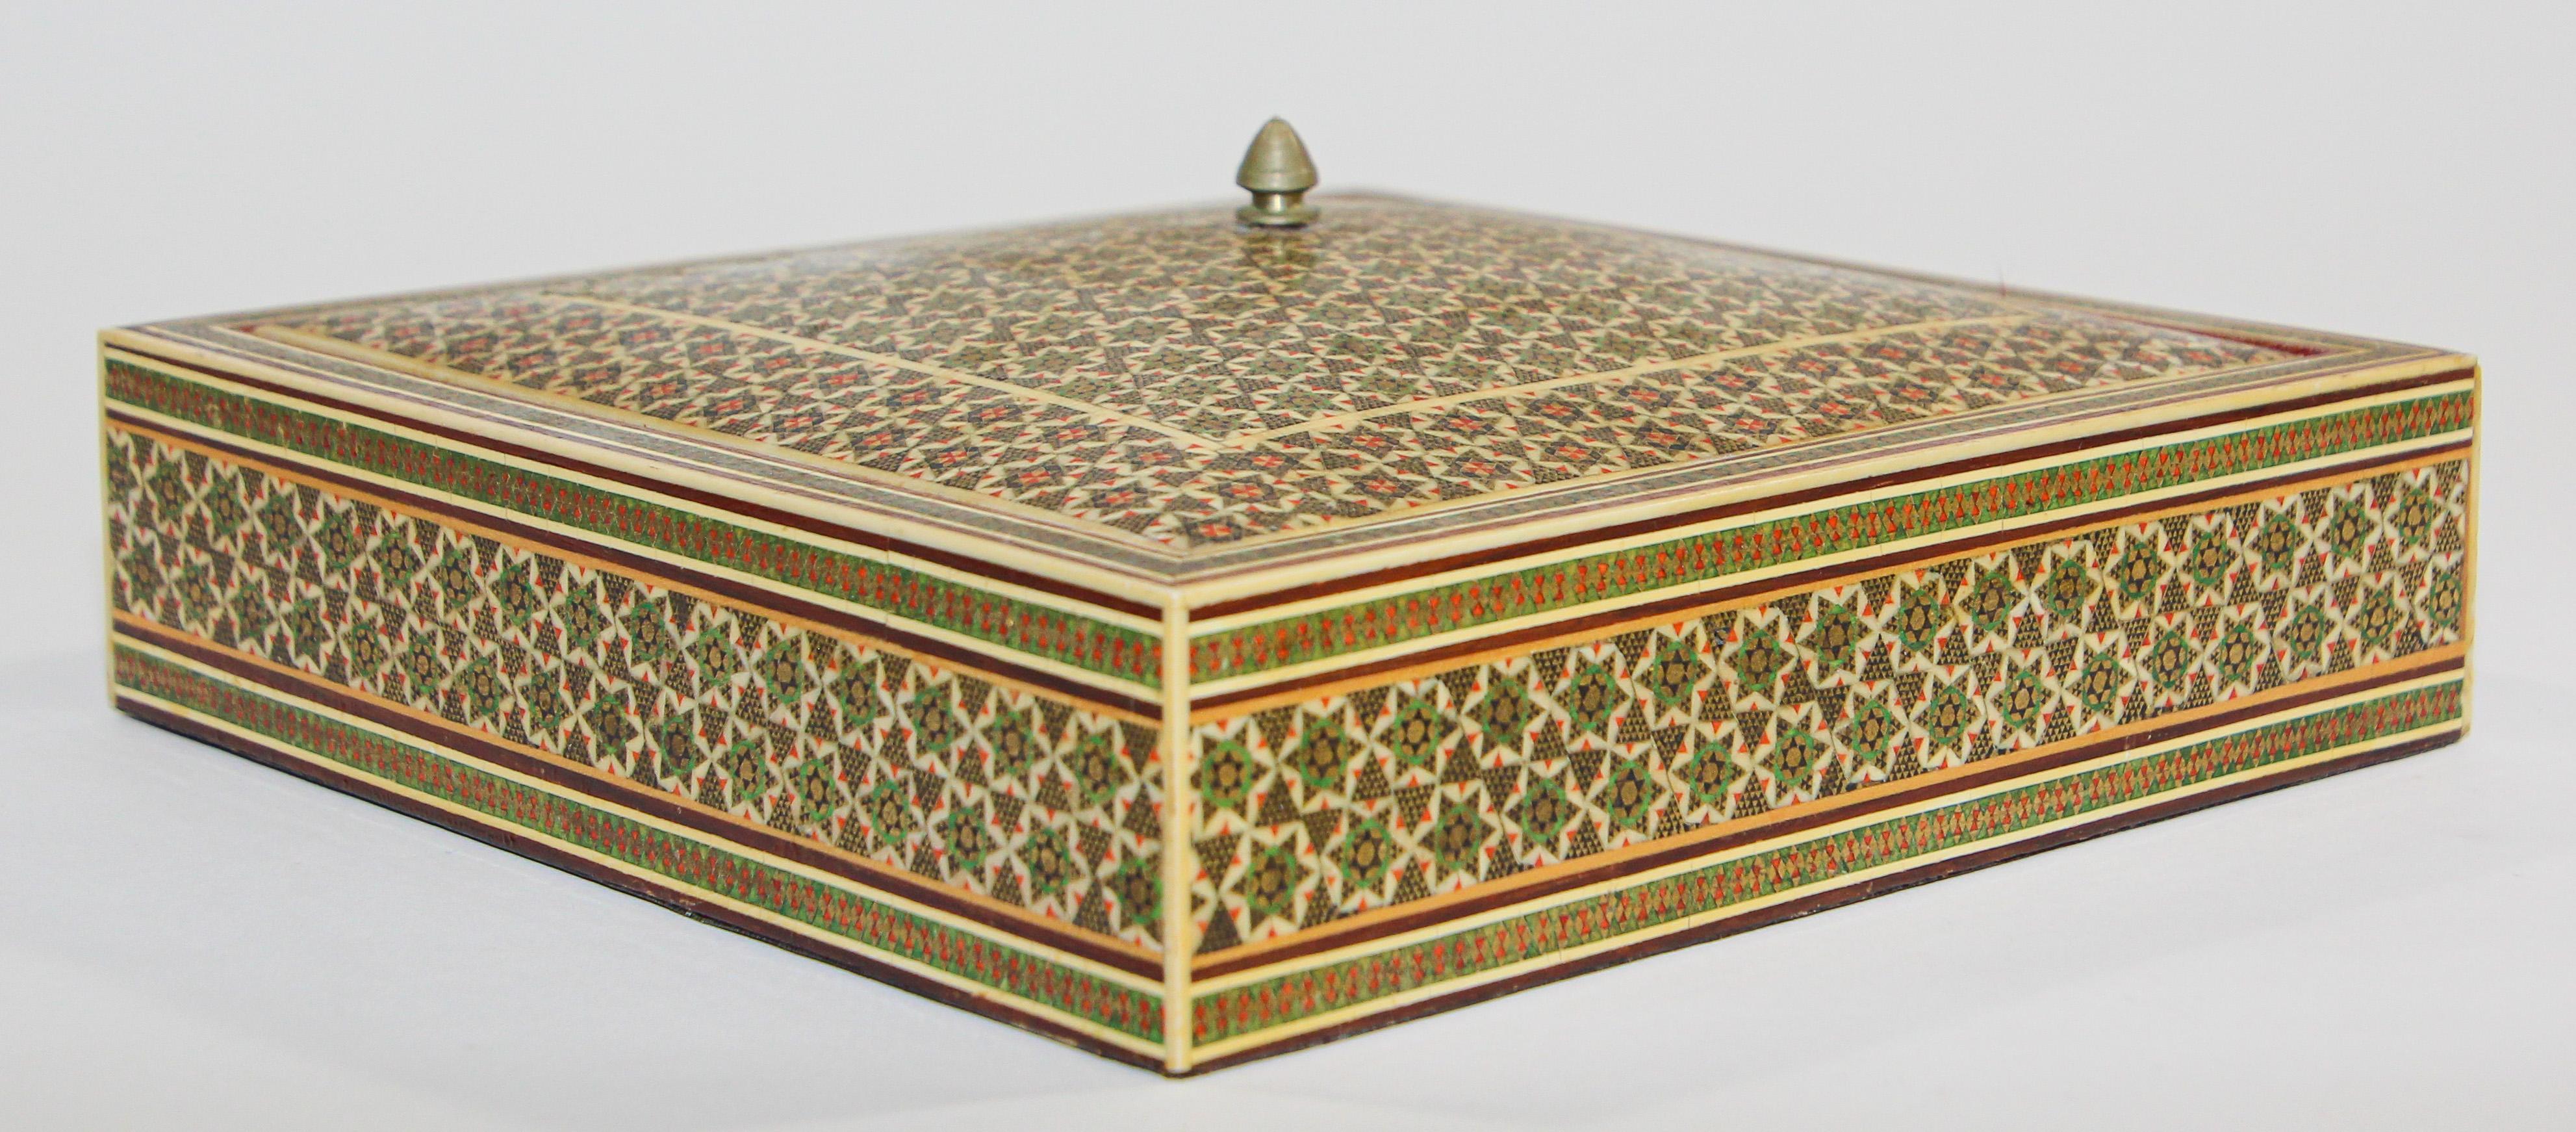 Moorish style micro mosaic marquetry inlaid jewelry box with lid.
Intricate inlaid Anglo Indian box with floral and geometric Islamic 
Moorish mosaic Sadeli design in a square shape form with mosaic inlay and marquetry, very fine artwork, lined in